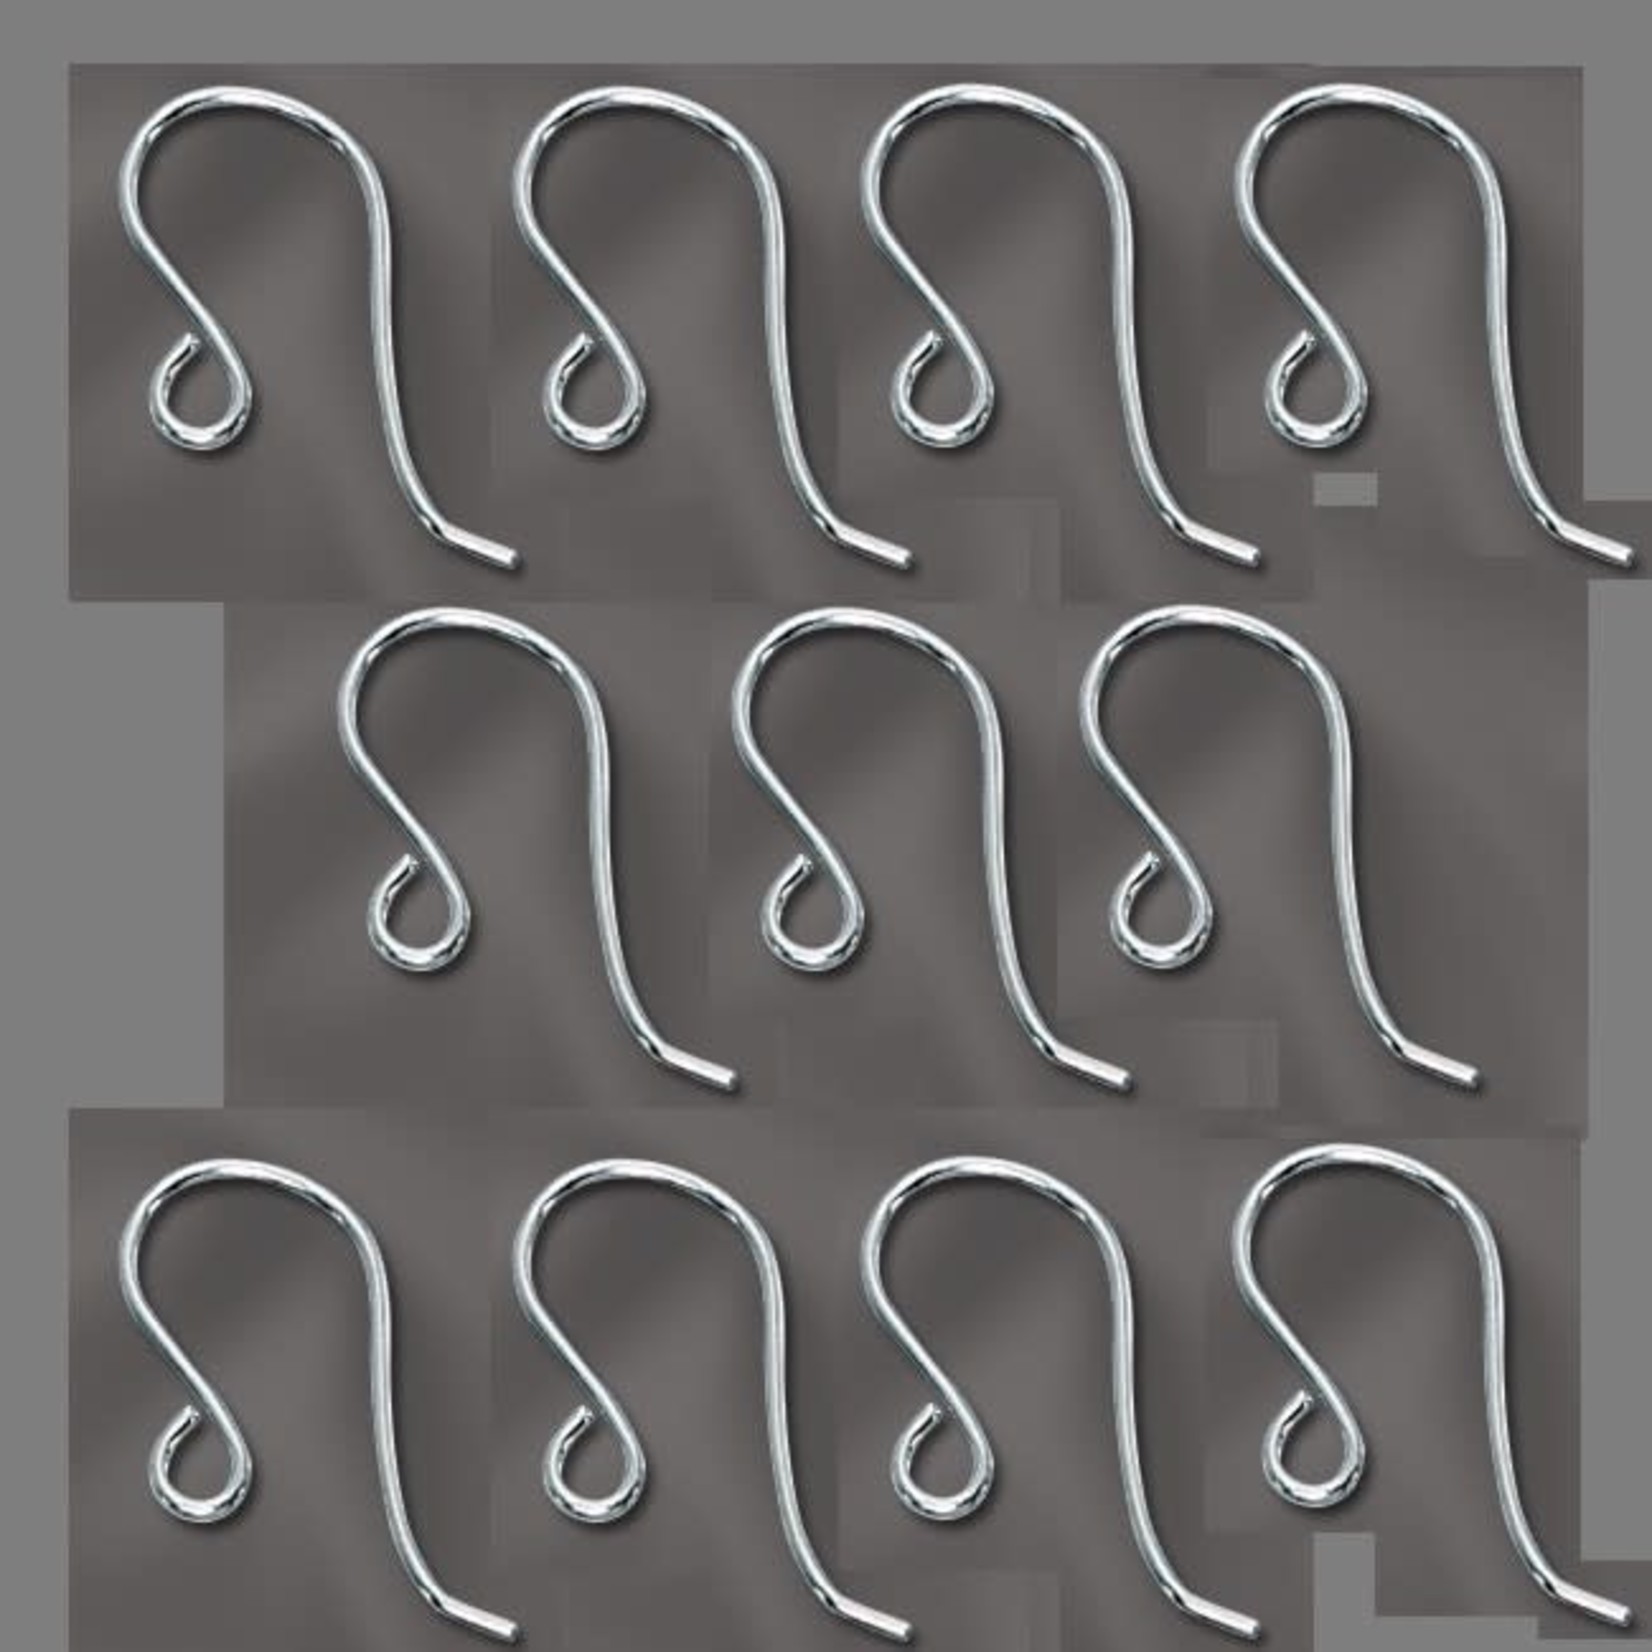 Sterling Silver Earwire Plain Round - 10 Pieces